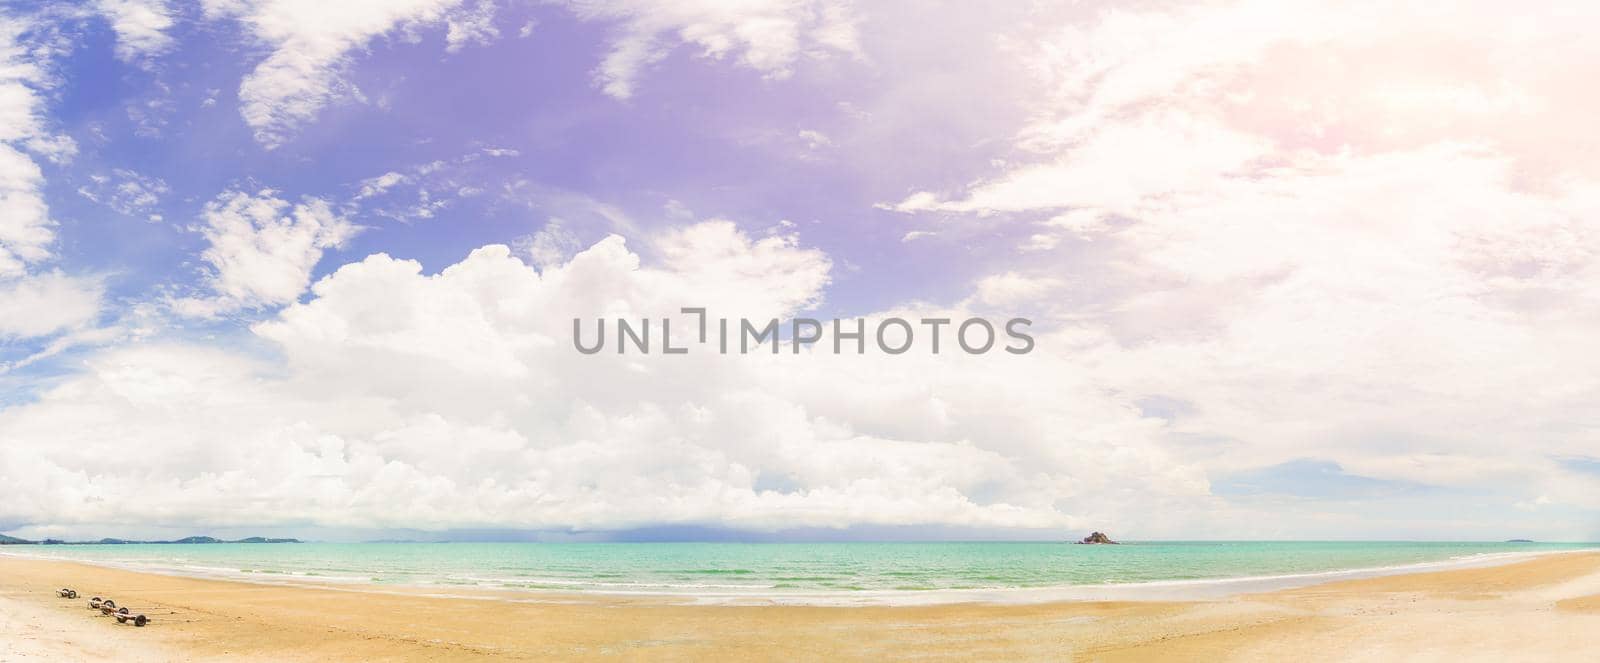 Panoramic nature landscape view of beautiful tropical beach and sea in sunny day with small island